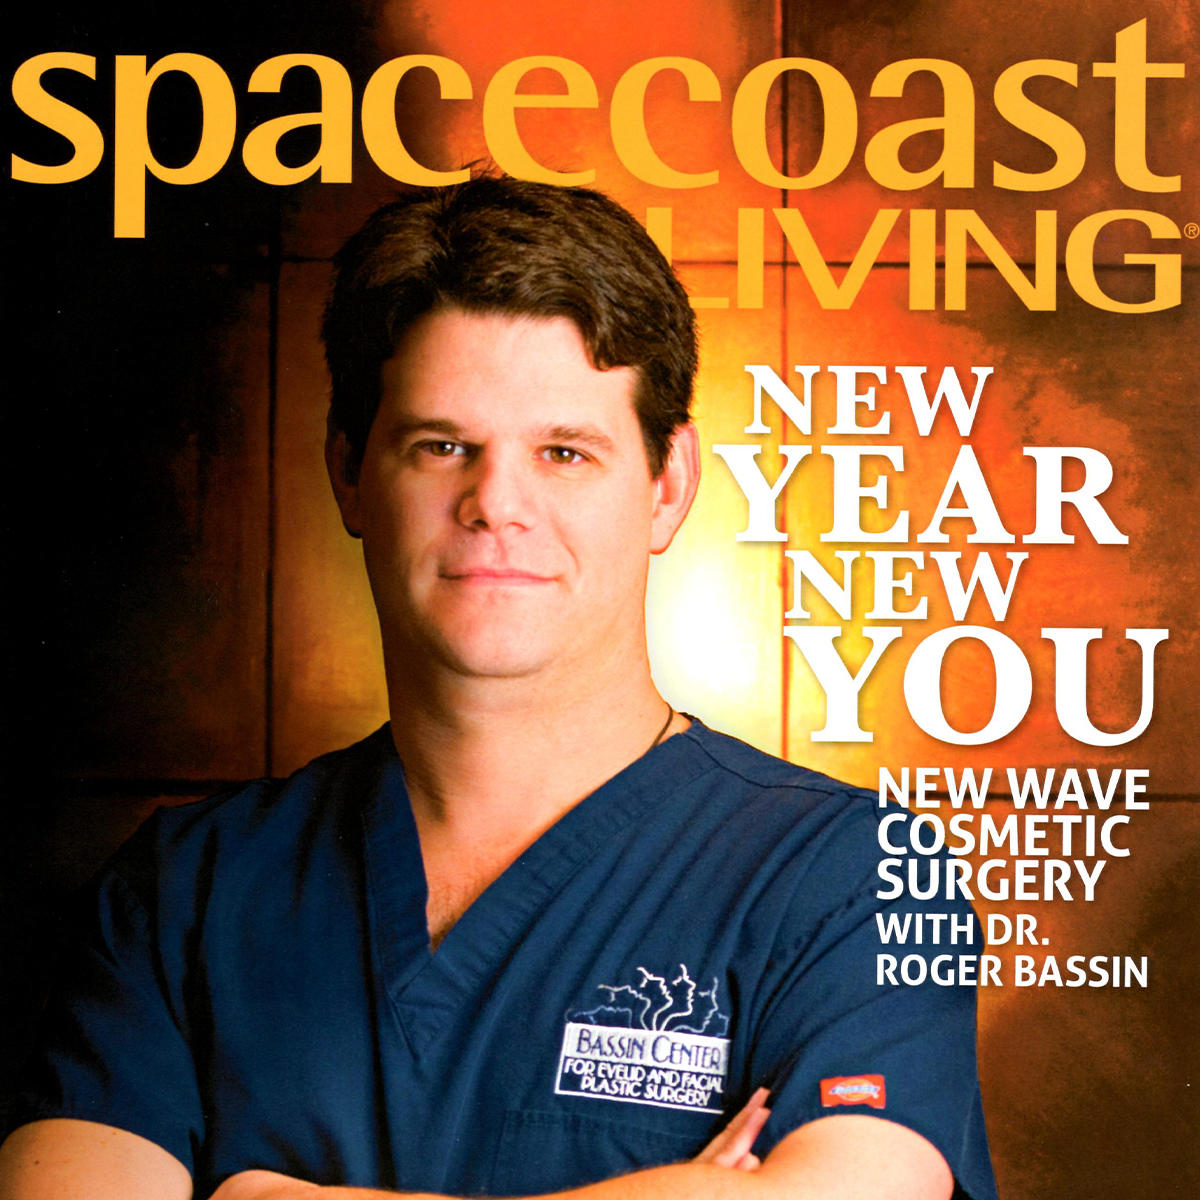 Dr. Bassin has been featured in numerous print media outlets, such as Spacecoast Living, Allure, Aesthetic Trends, Lifestyle, & Orlando Style to discuss all things plastic surgery—from the latest cosmetic surgery trends to cutting-edge procedures & promising new technologies offered at Body By Bassin in Florida.